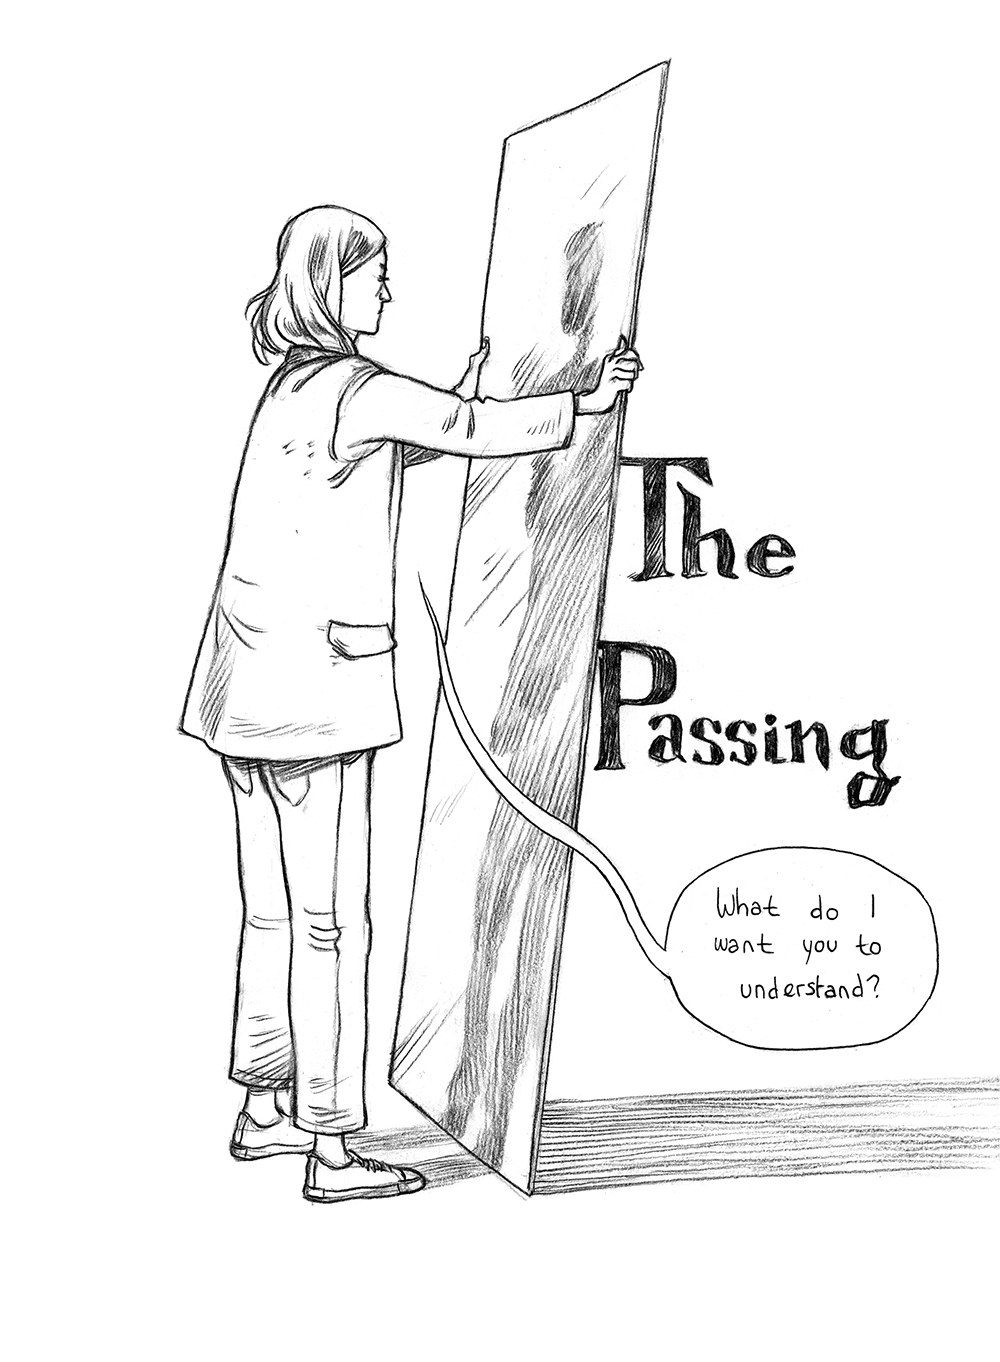 the_passing_01